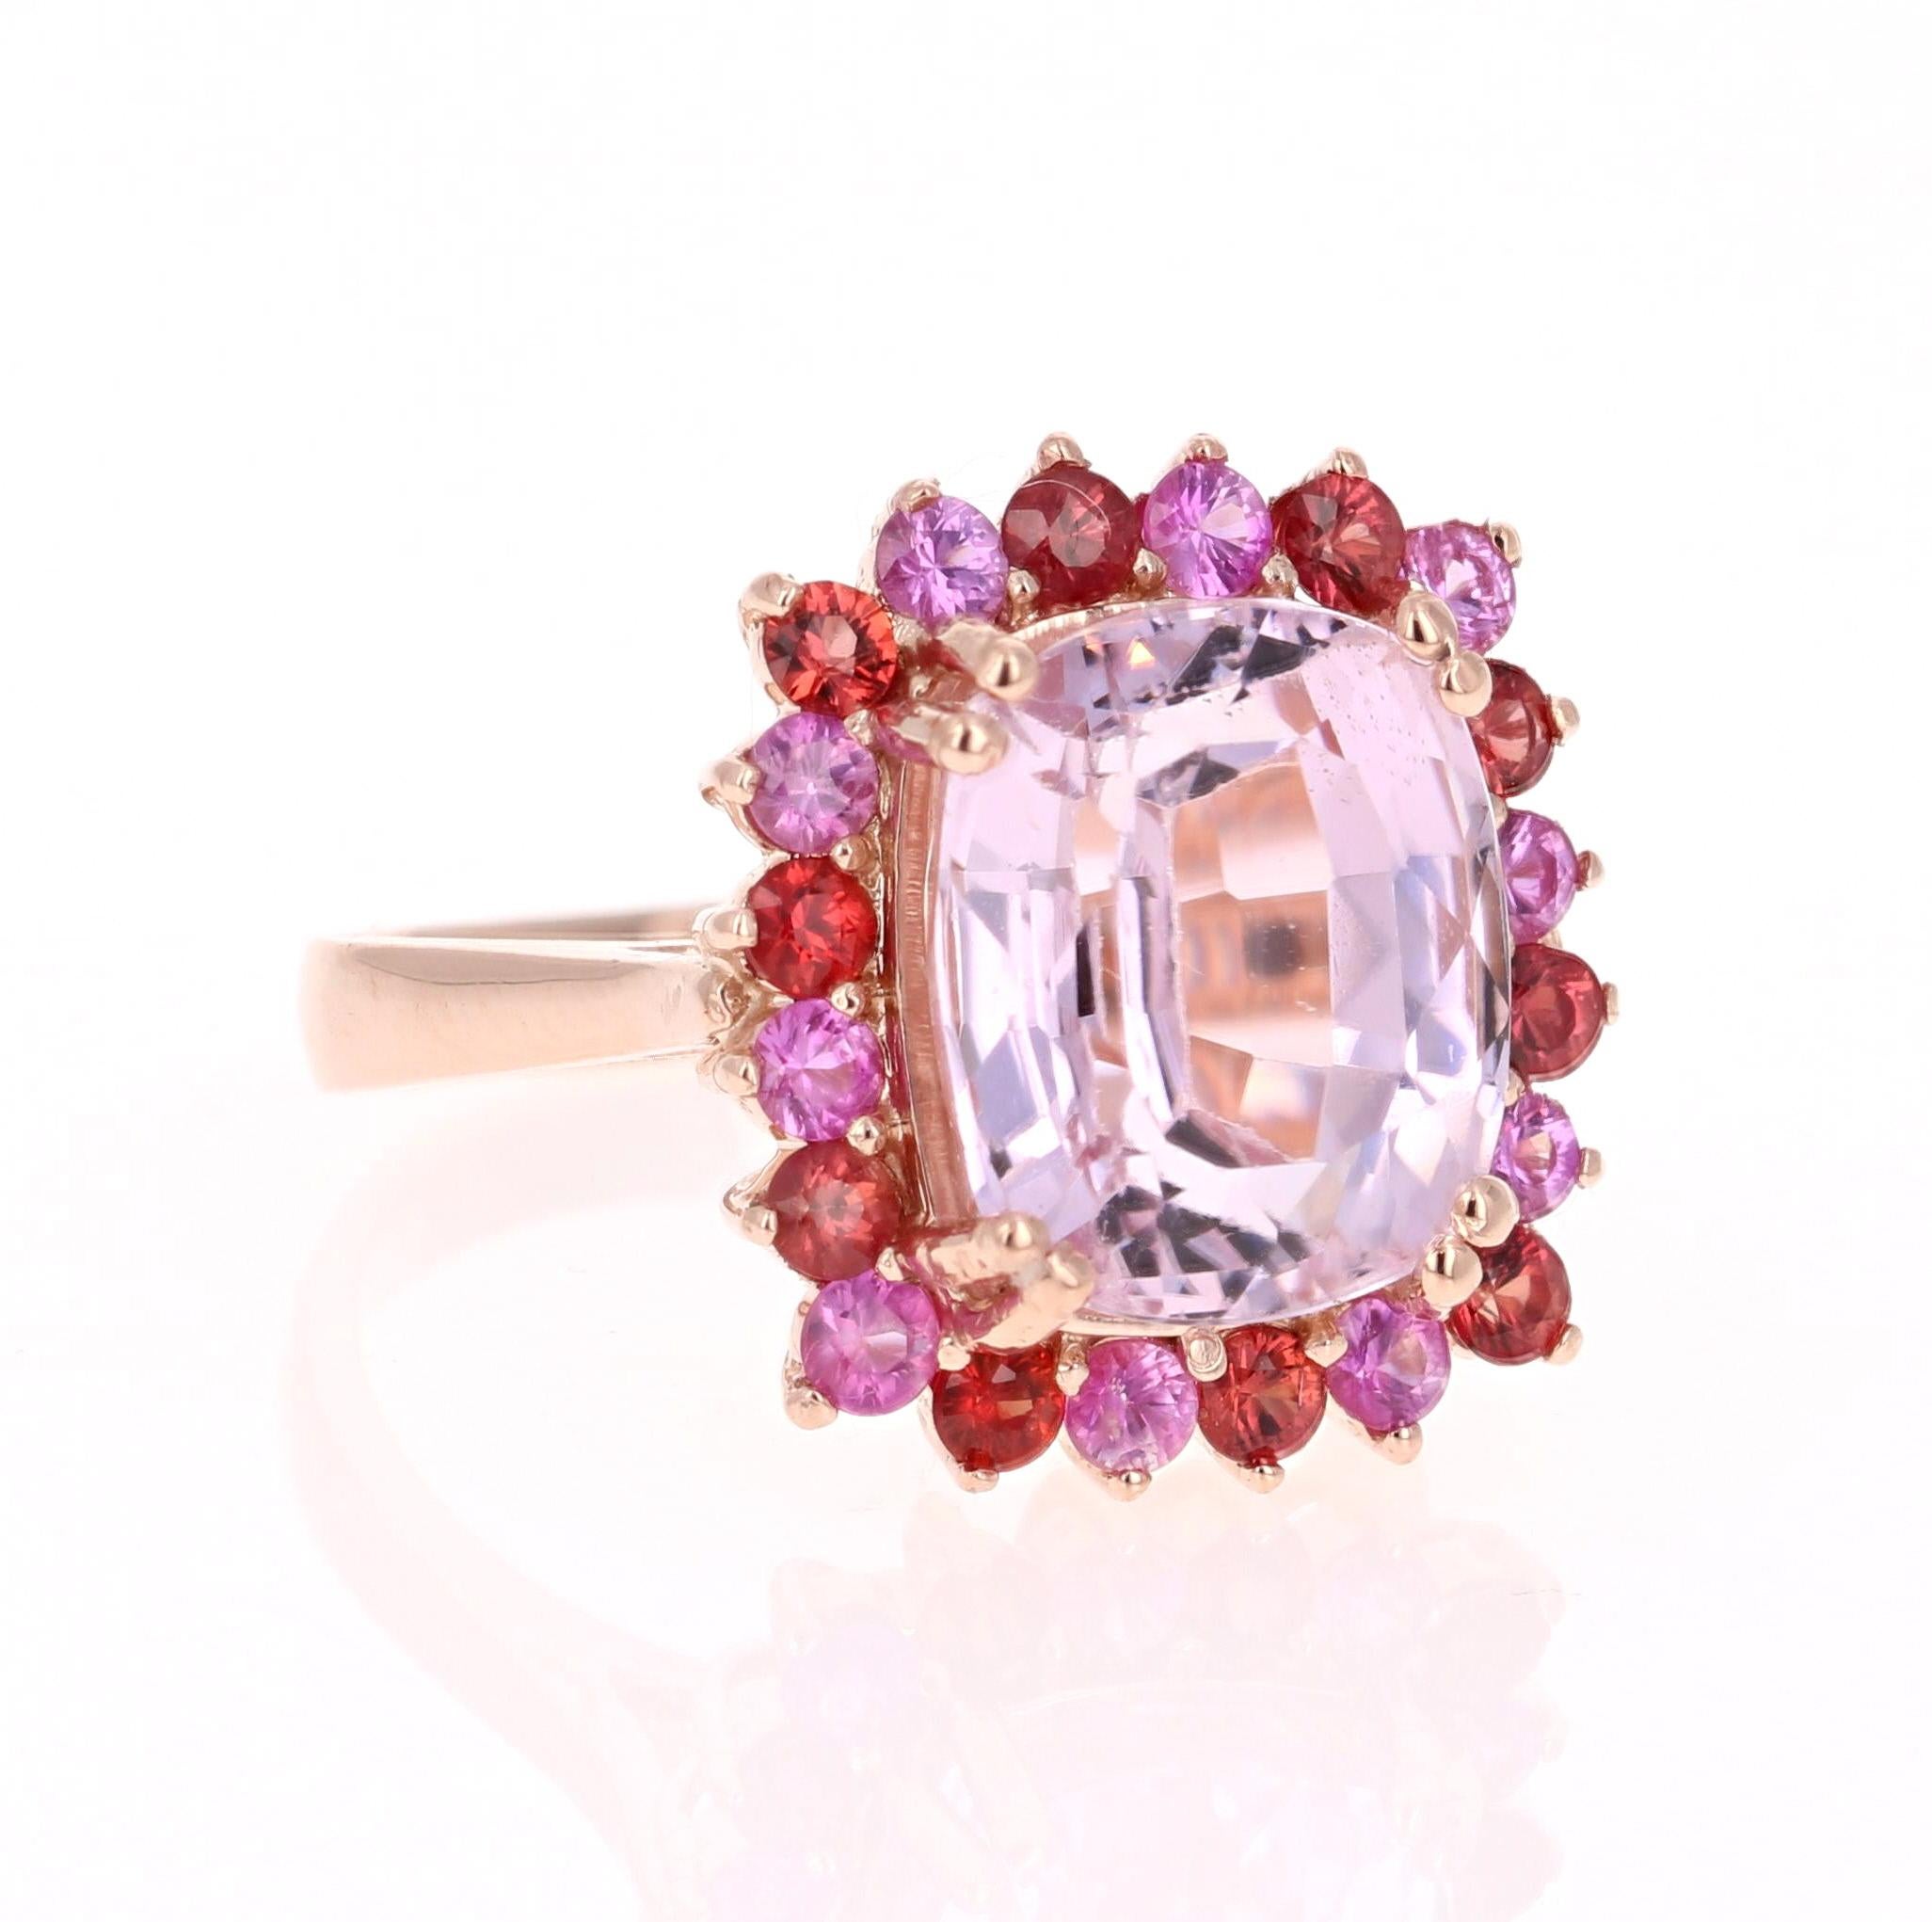 Candy Crush on your Finger!! 

This beautiful ring has a huge Emerald-Cushion Cut 7.96 Carat Kunzite that is set in the center of the ring and is surrounded by 20 Round Cut Pink and Deep Orange-Red Sapphires that weigh 1.34 Carats. The total carat